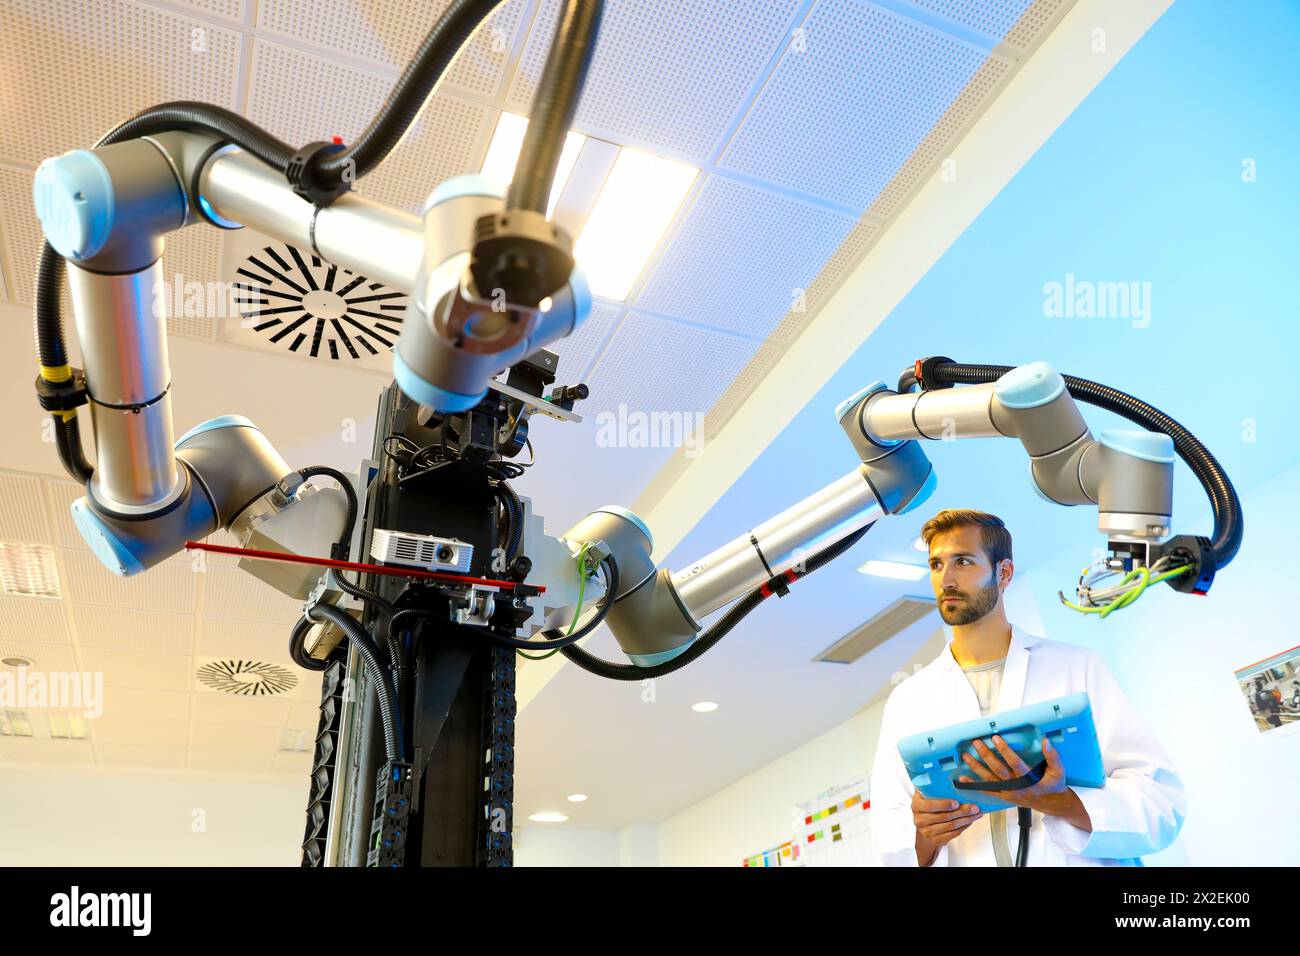 Robot with two arms for mobile manipulation, Humanoid robot for automotive assembly tasks in collaboration with people, Industry, Tecnalia Research & Stock Photo